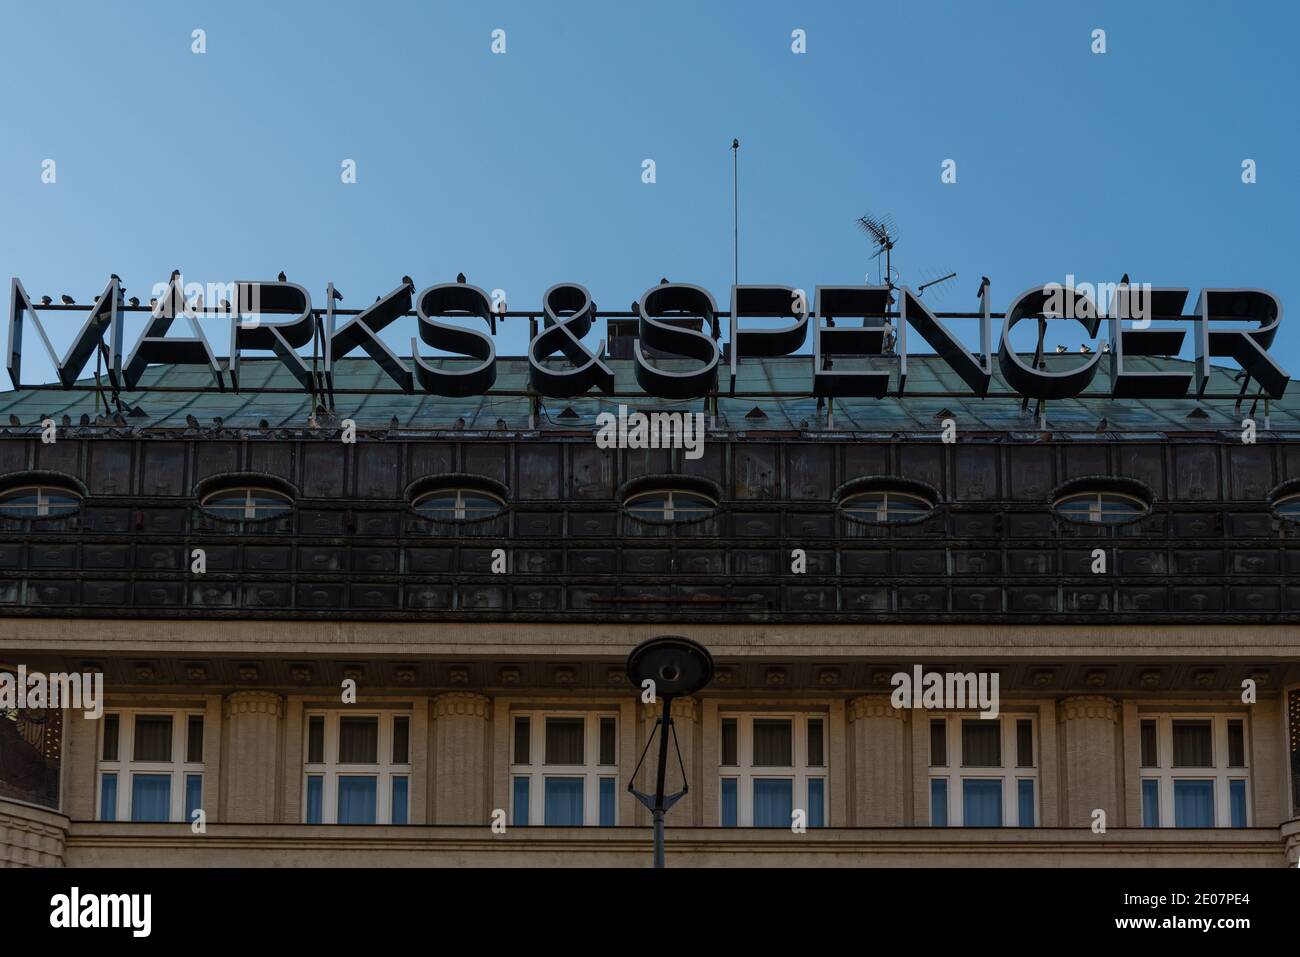 Prague, czech Republic, 12-30-2020. Marks & Spenser, one of the iconic shopping malls in Prague, exhibiting their brand and products in a prestigious Stock Photo